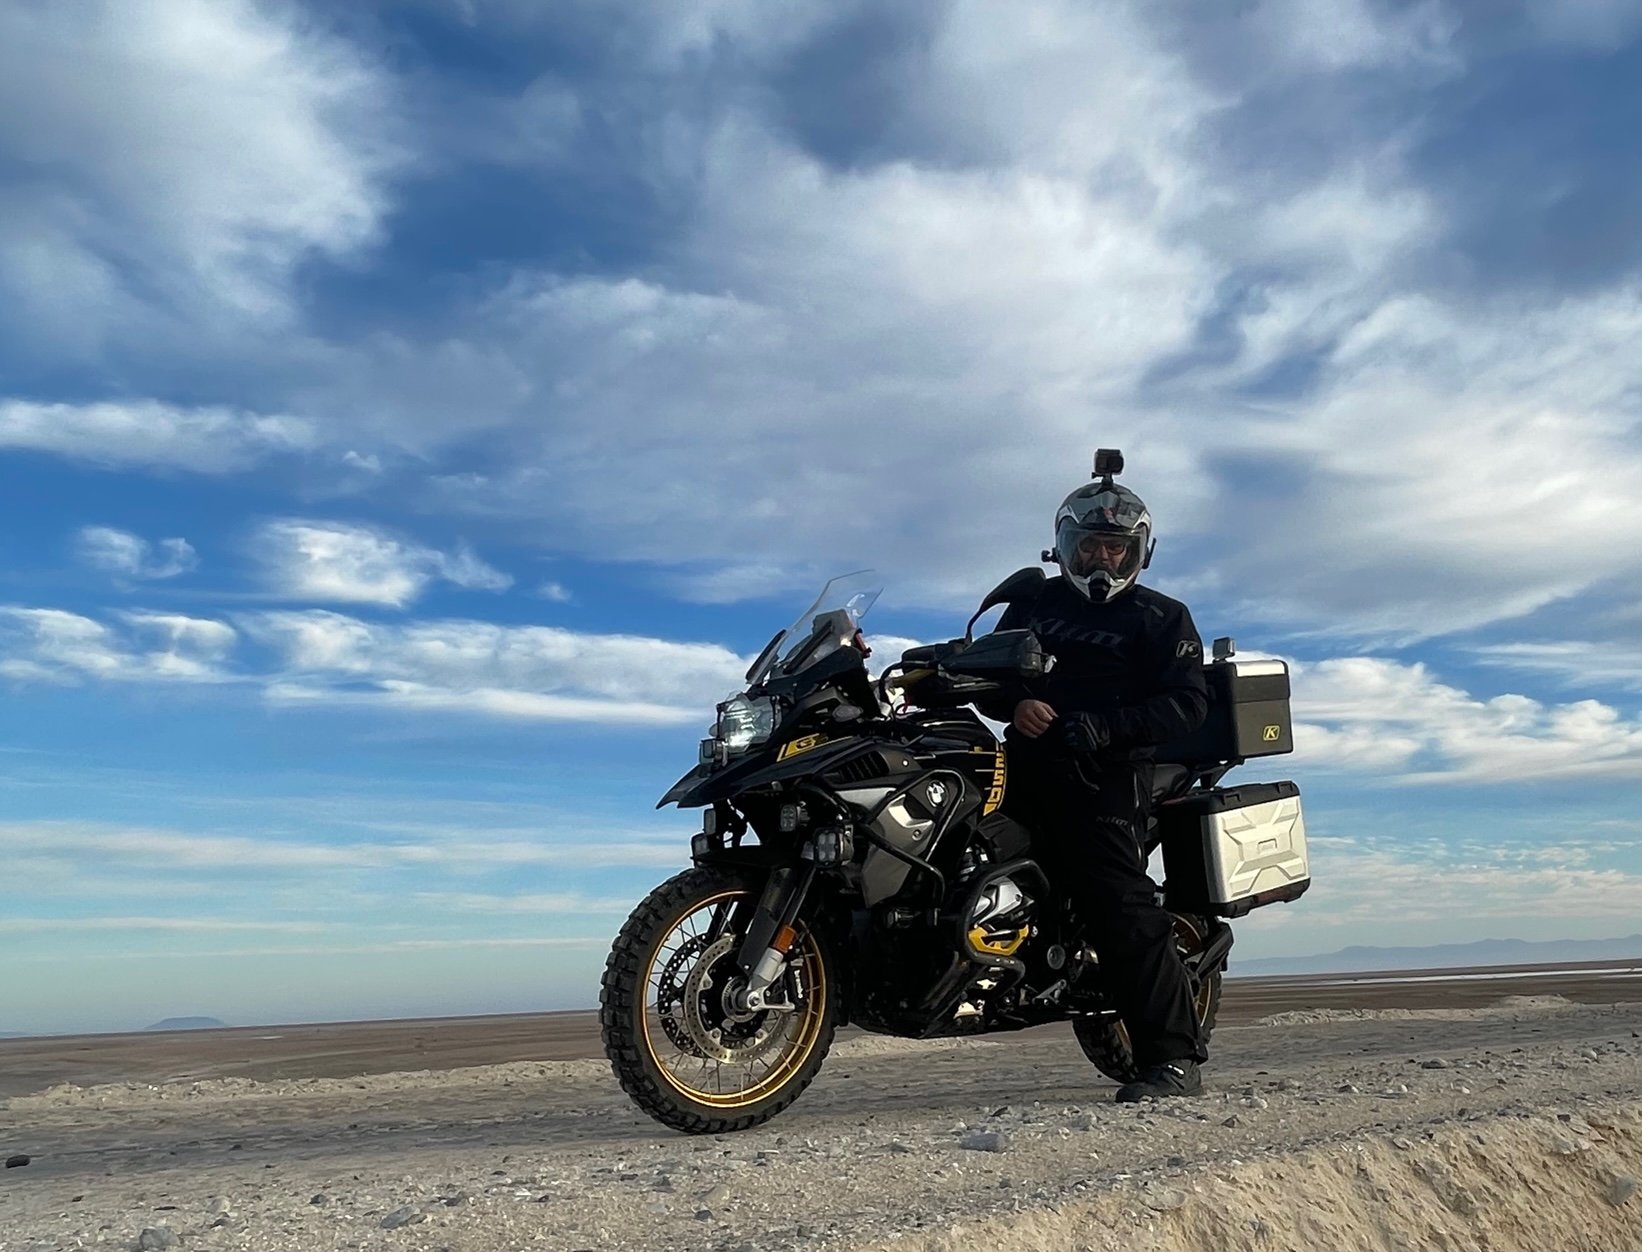 Motorcycle stopped in desert with blue sky and clouds in background